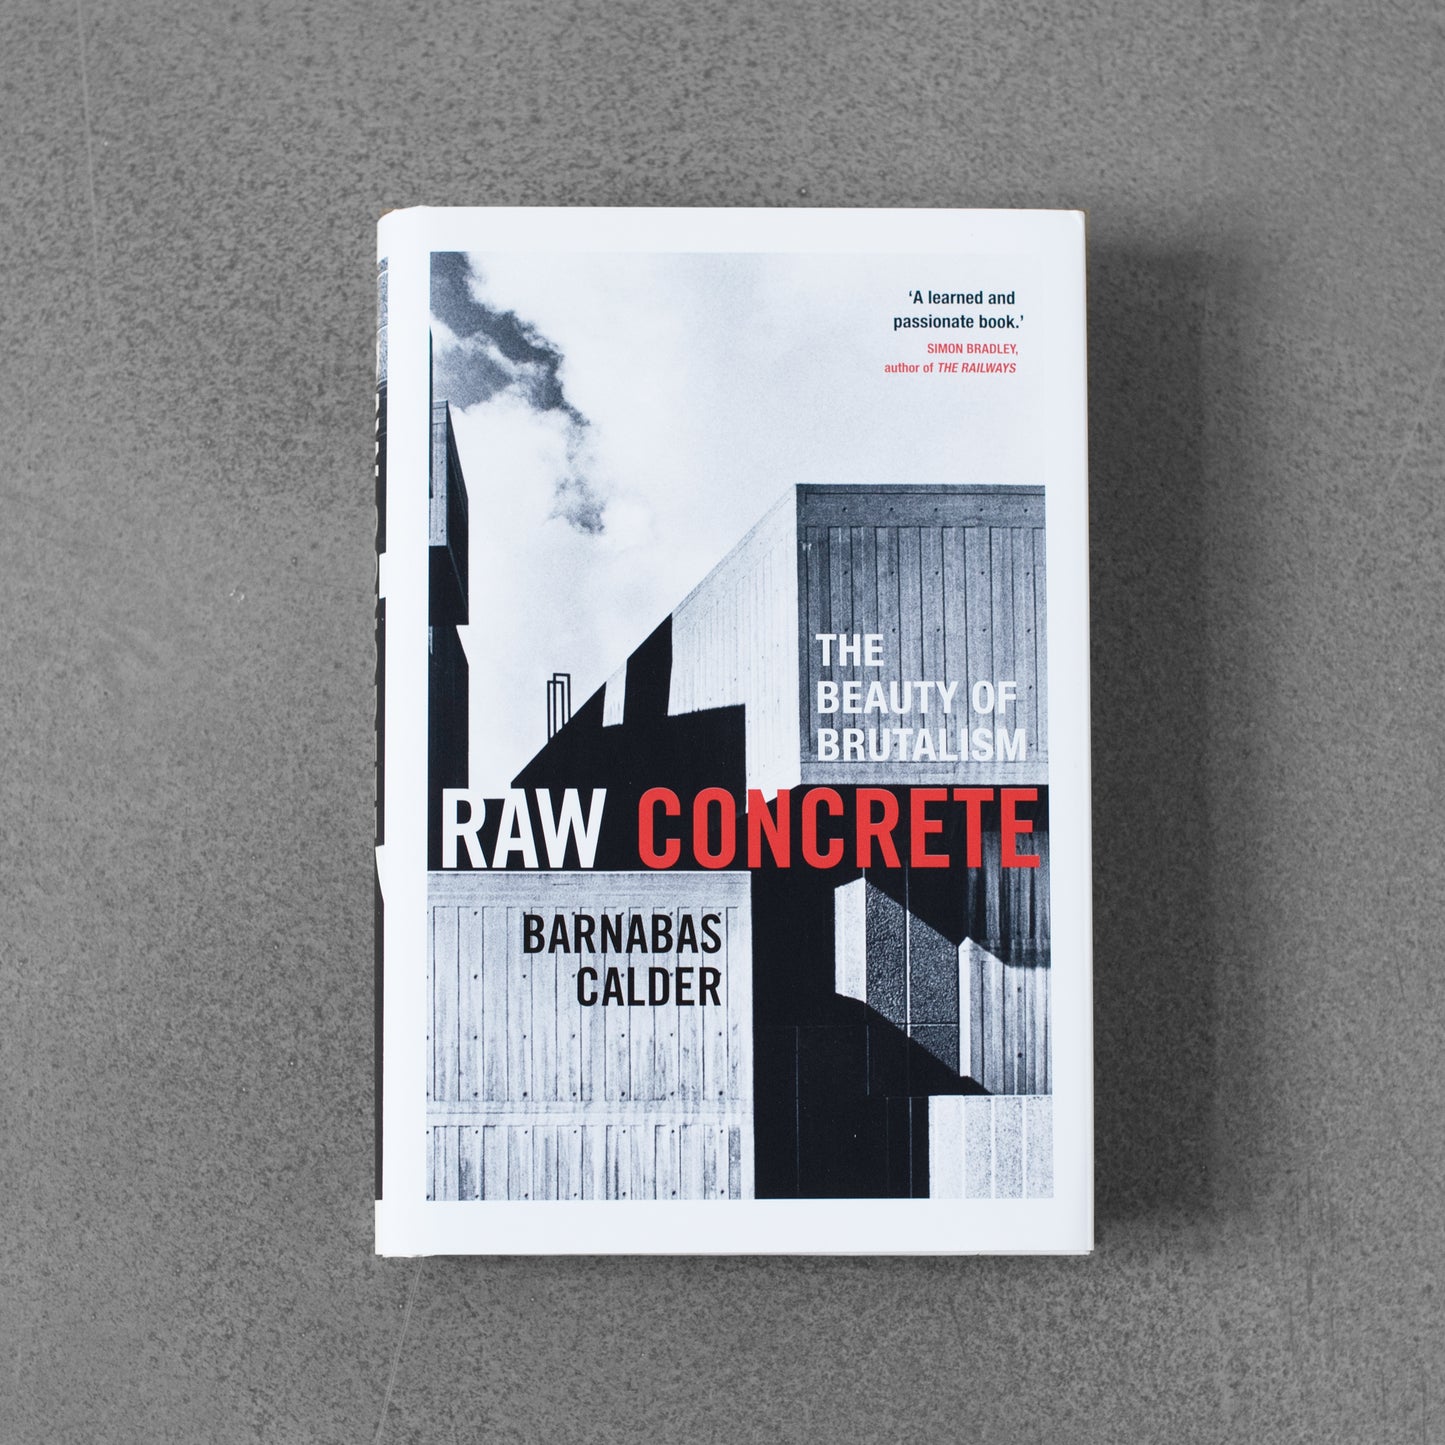 Raw Concrete: The Beauty of Brutalism - Barnabas Calder